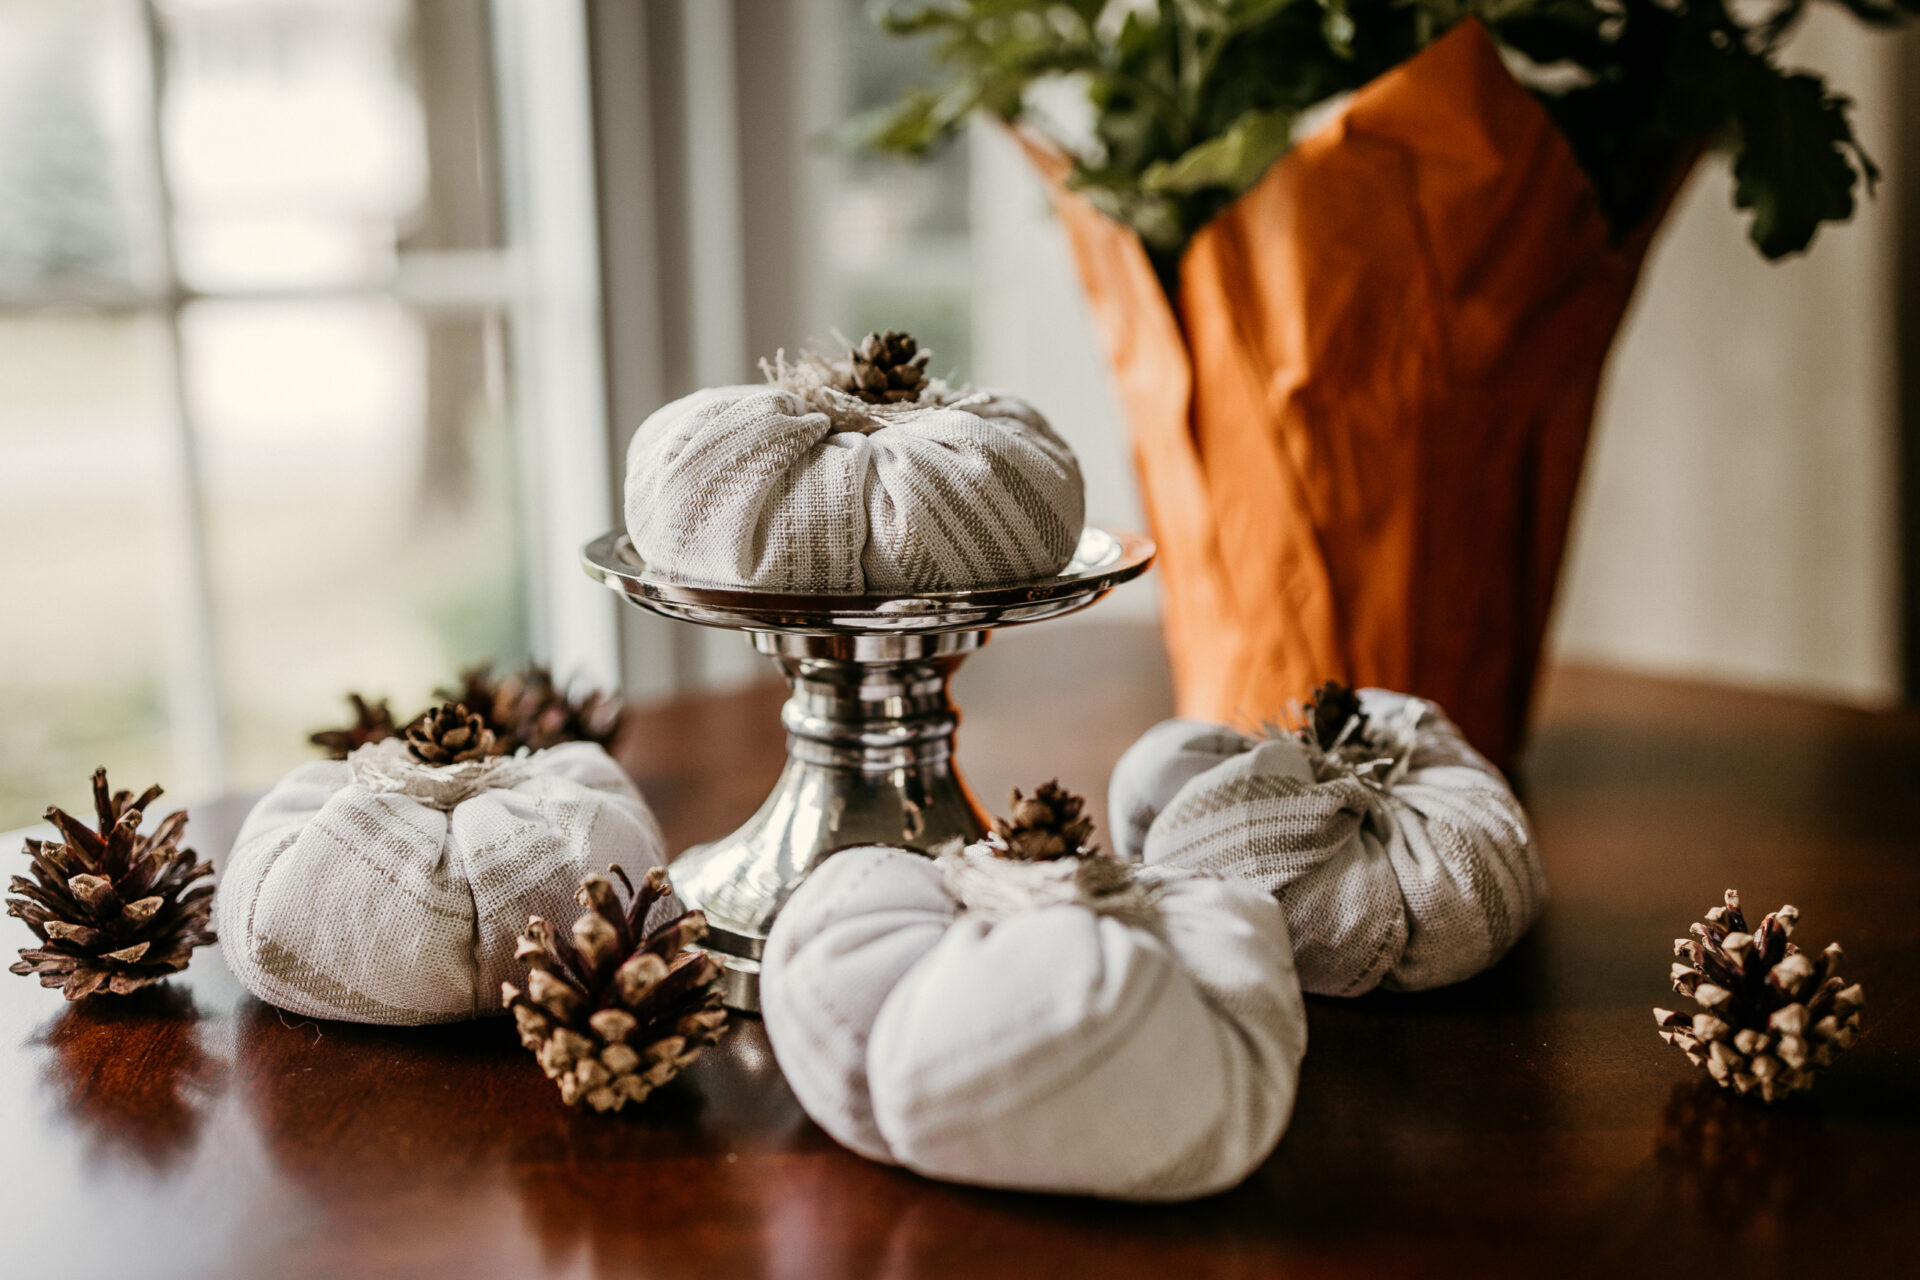 A set of 4 linen pumpkins with neutral color stripes topped with mini pinecones are photographed in front of a window.